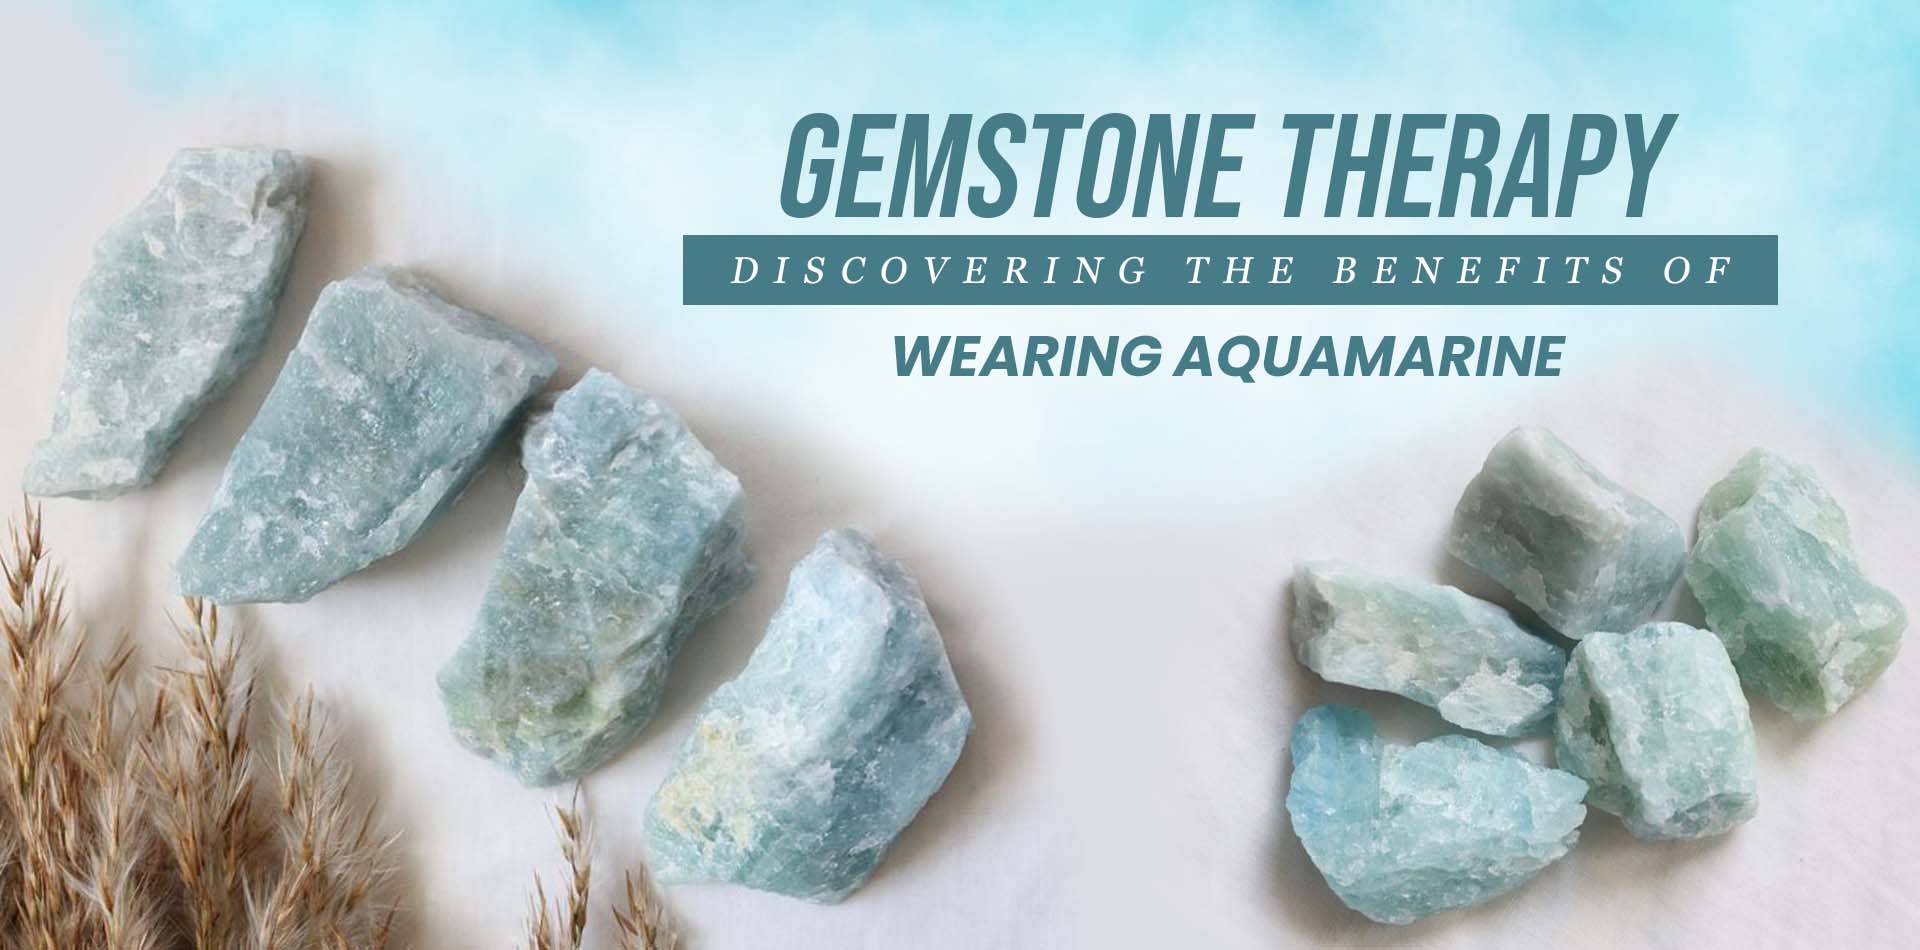 Gemstone Therapy: Discovering the Benefits of Wearing Aquamarine